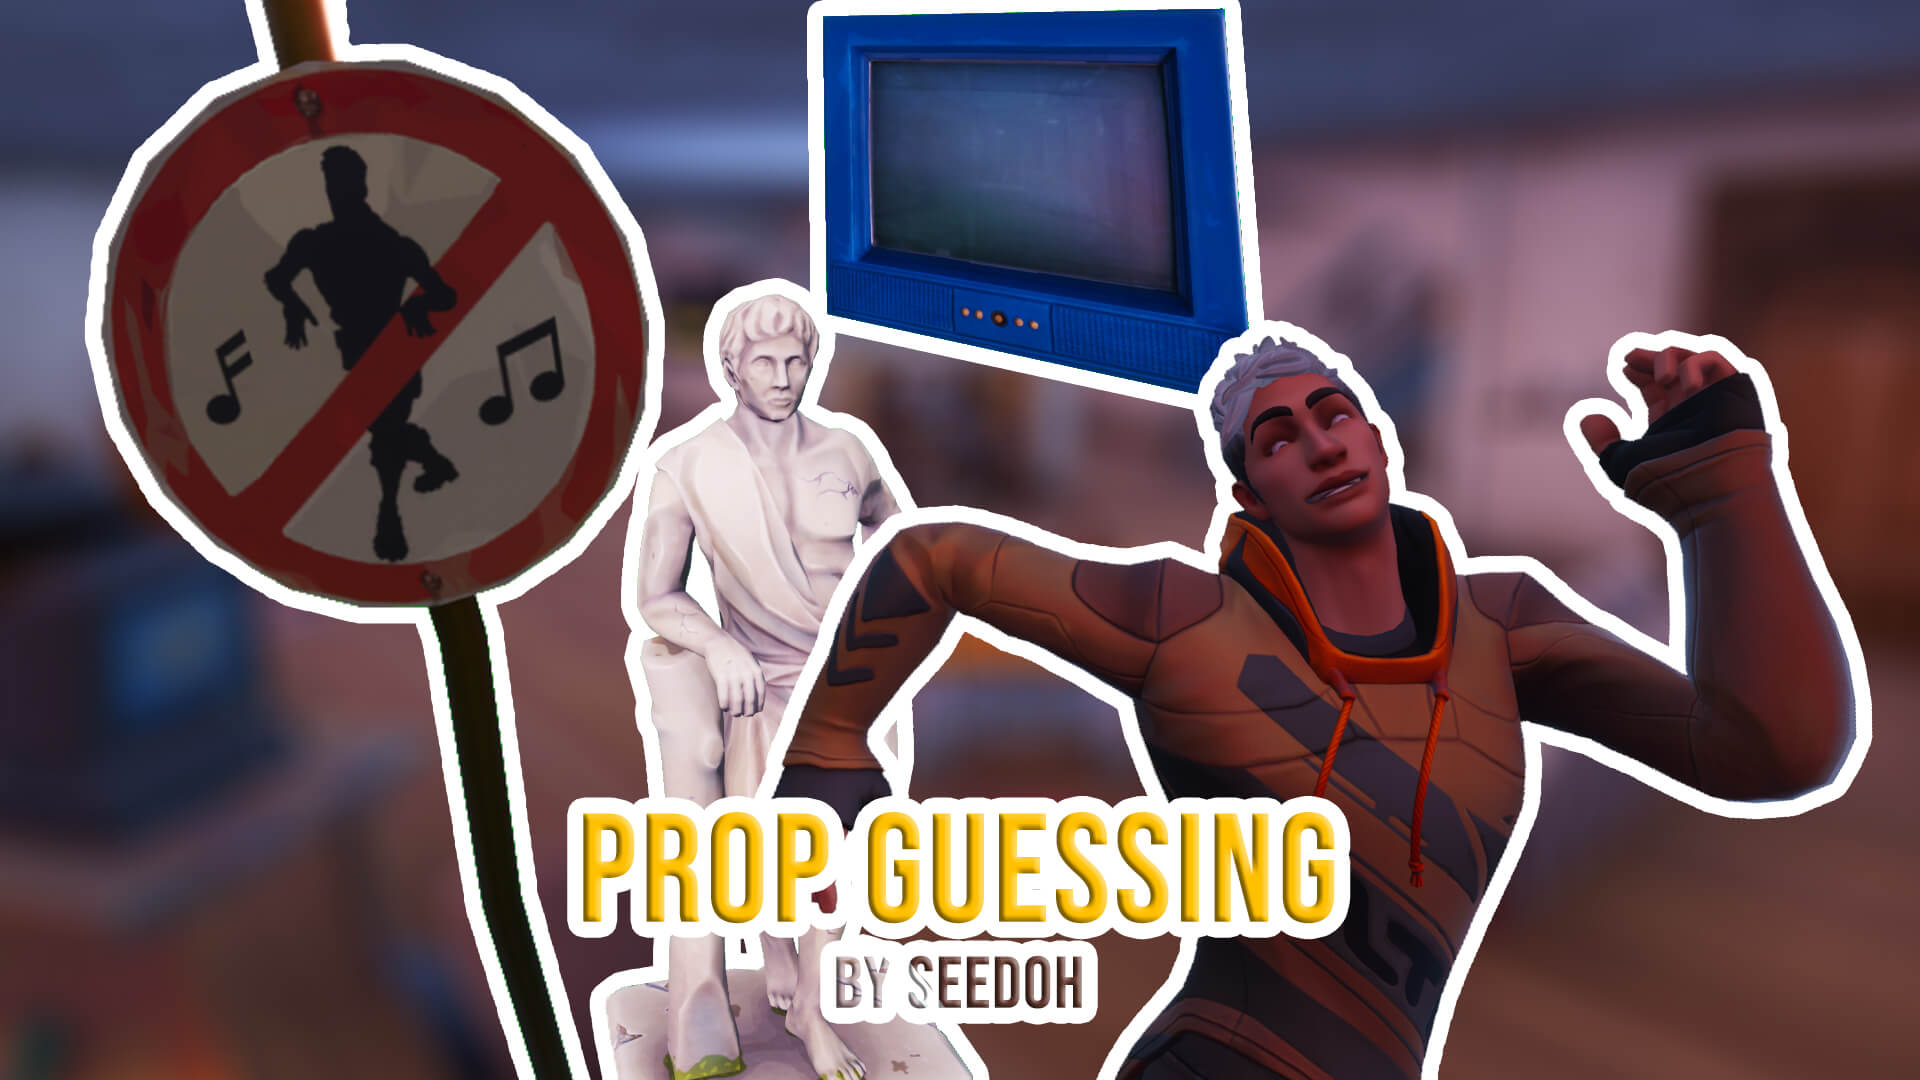 PROP GUESSING